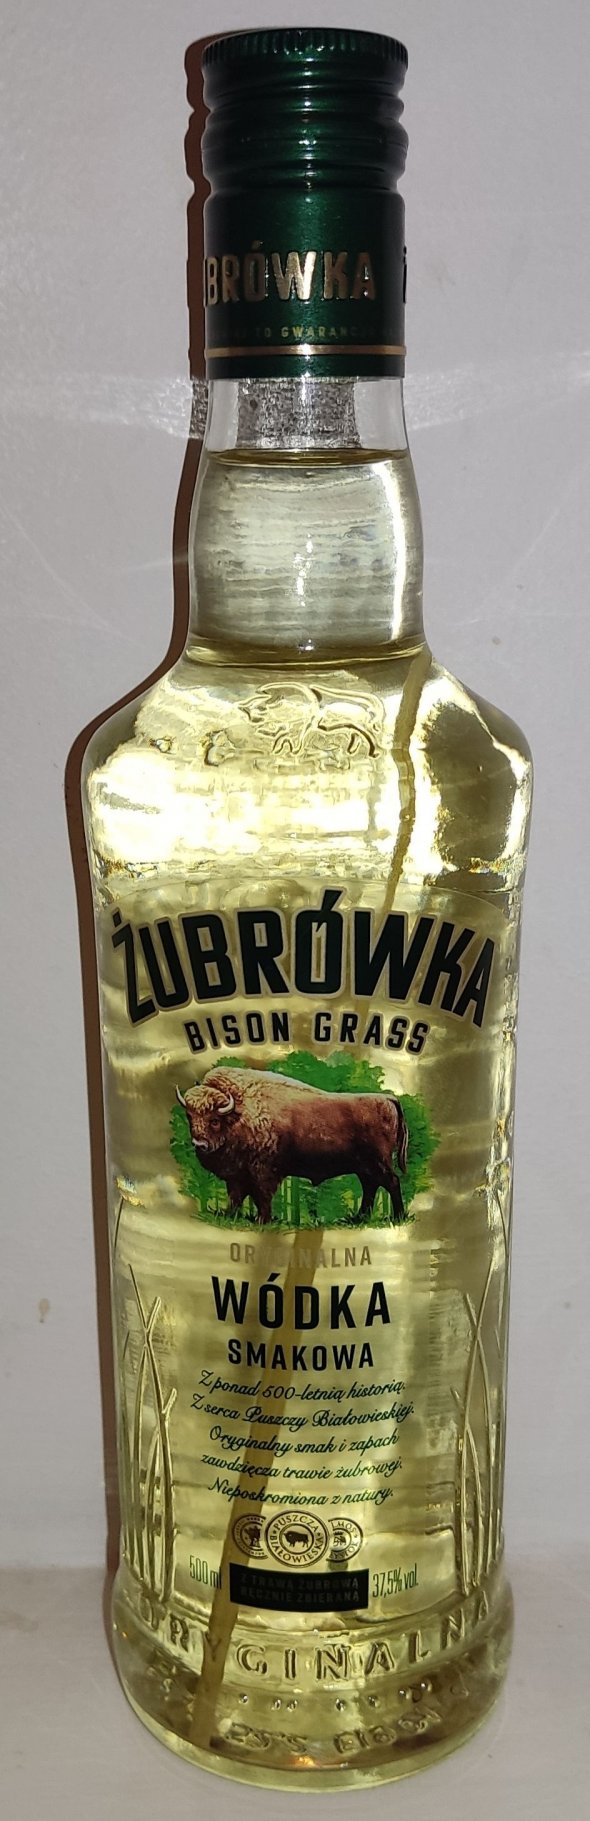 directly and Bison Grass other Marketplace, Vodka with Zubrowka 37.5%) Vintage Buy users Ends Bin :: Wine, and Rare wine (Abv Fine Wine. sell Wine